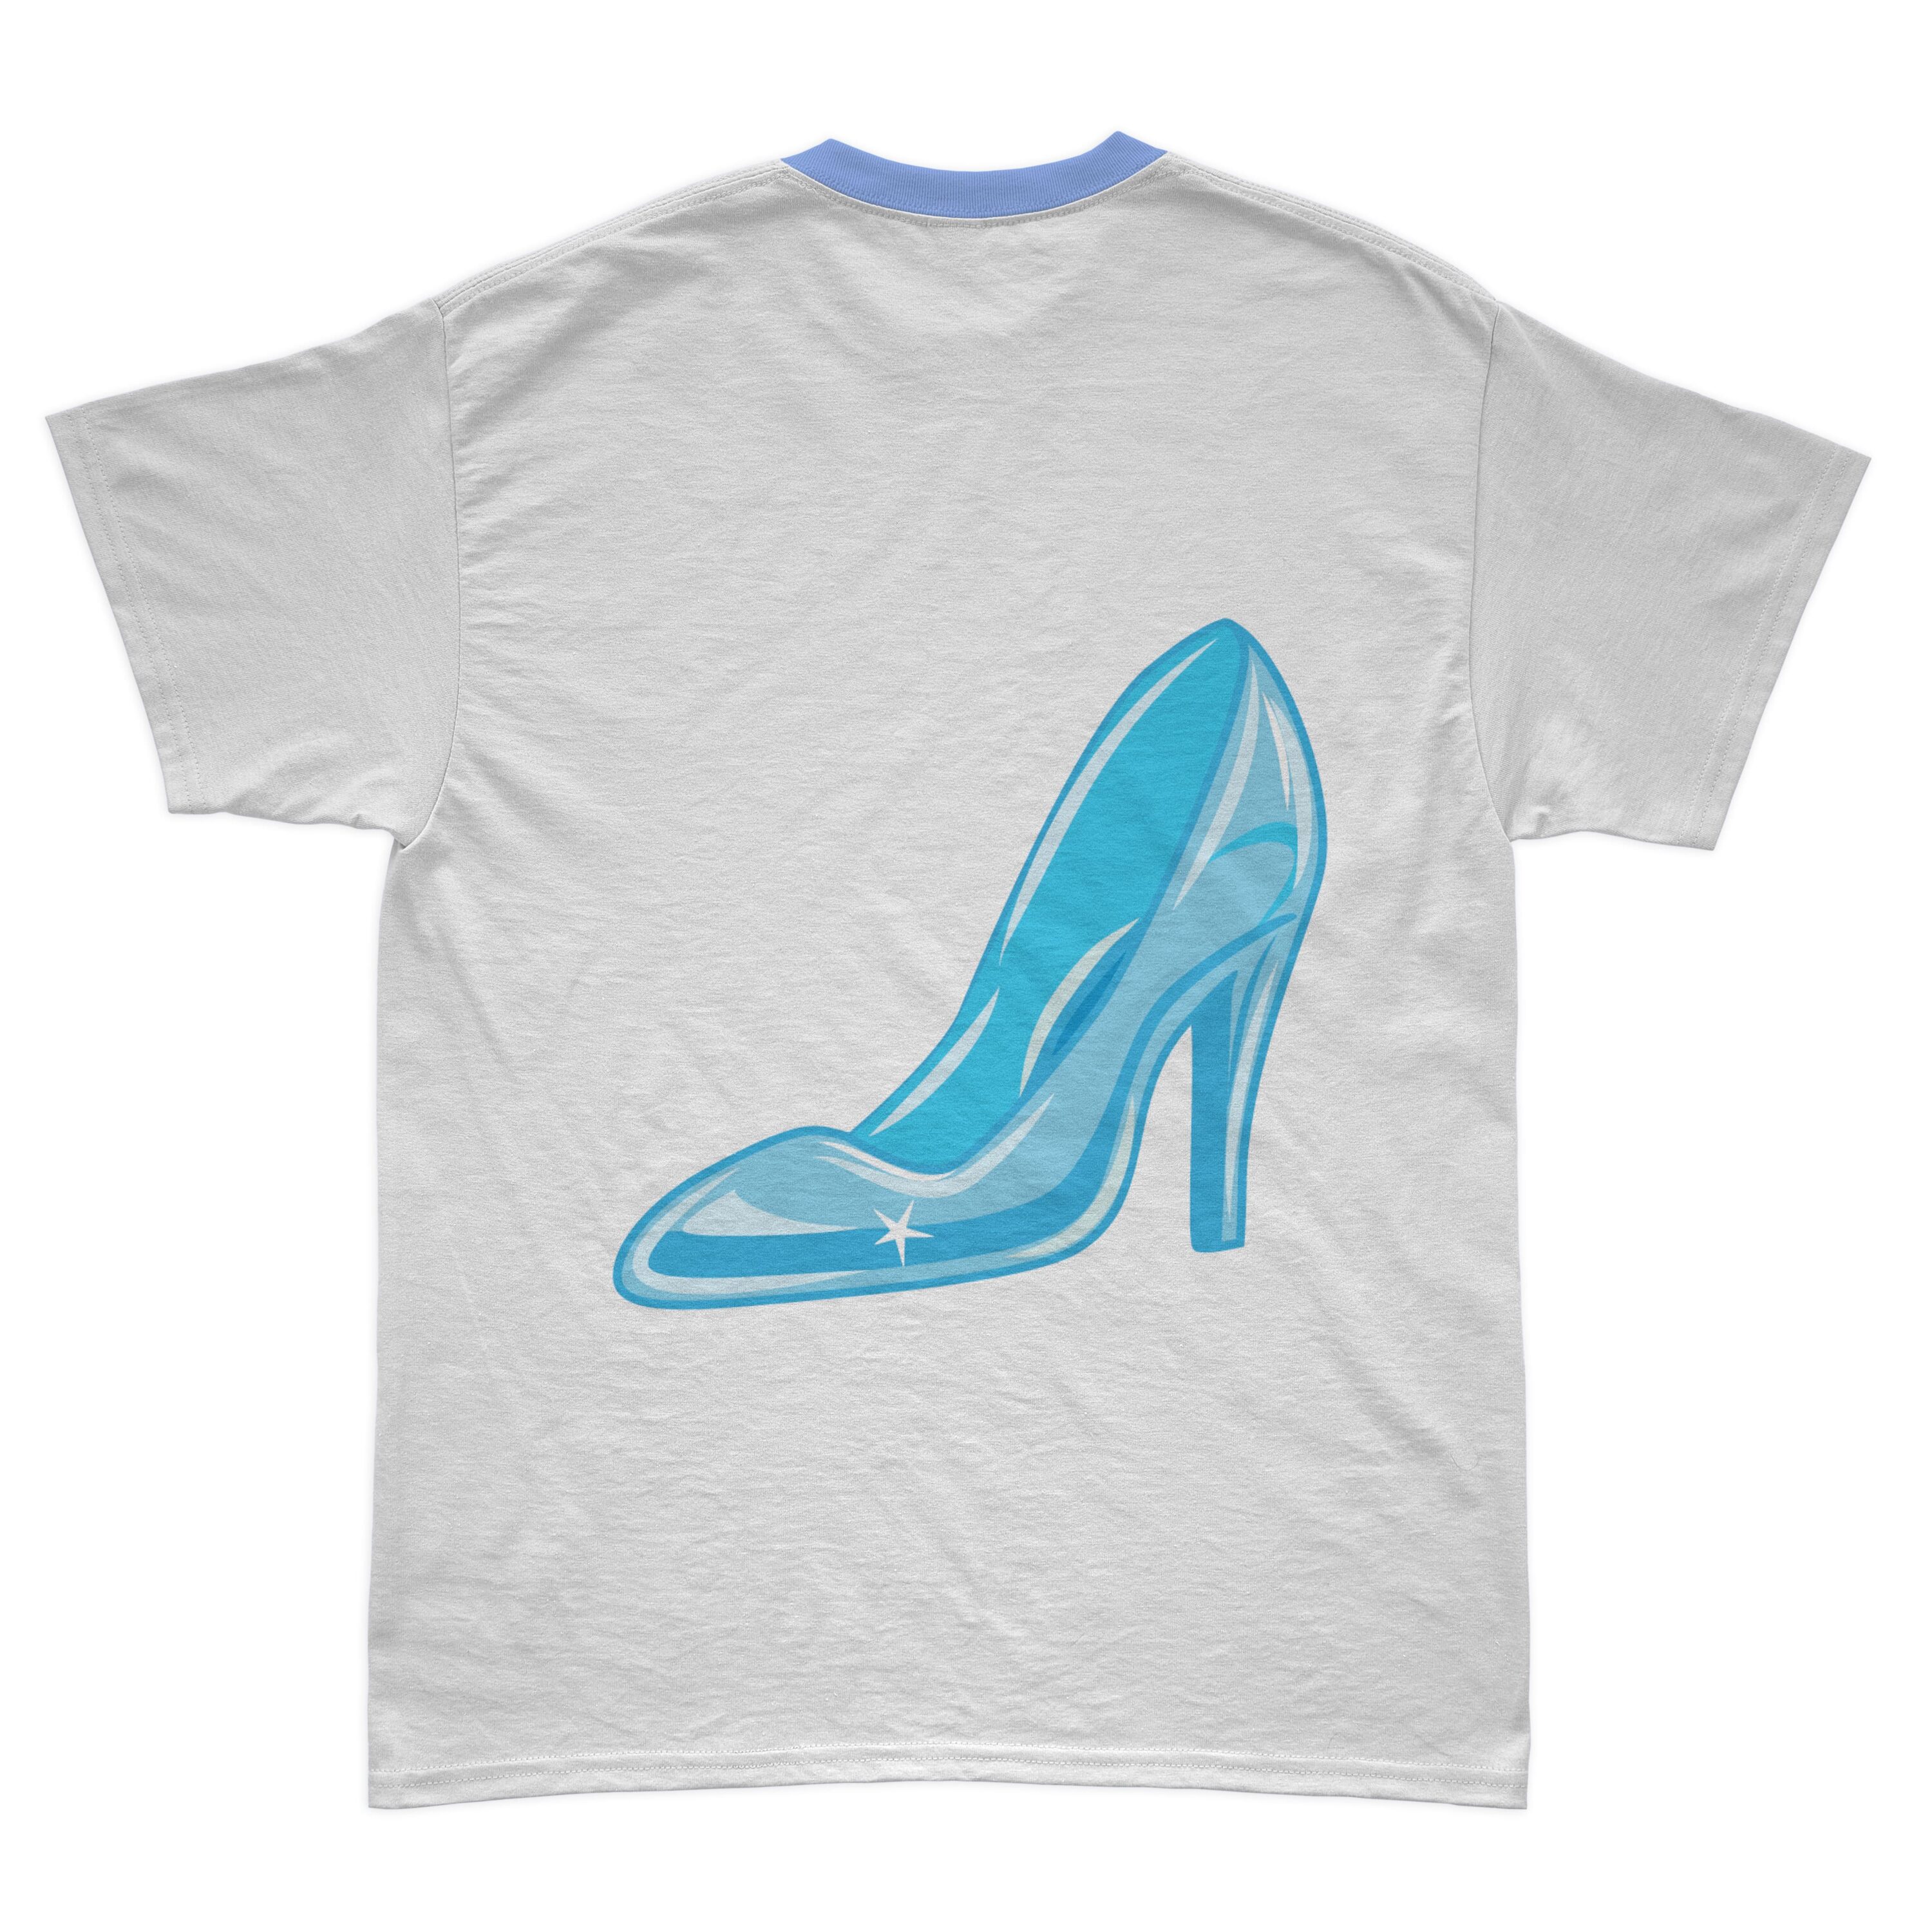 Image of a white t-shirt with an adorable print of Cinderella's shoe.